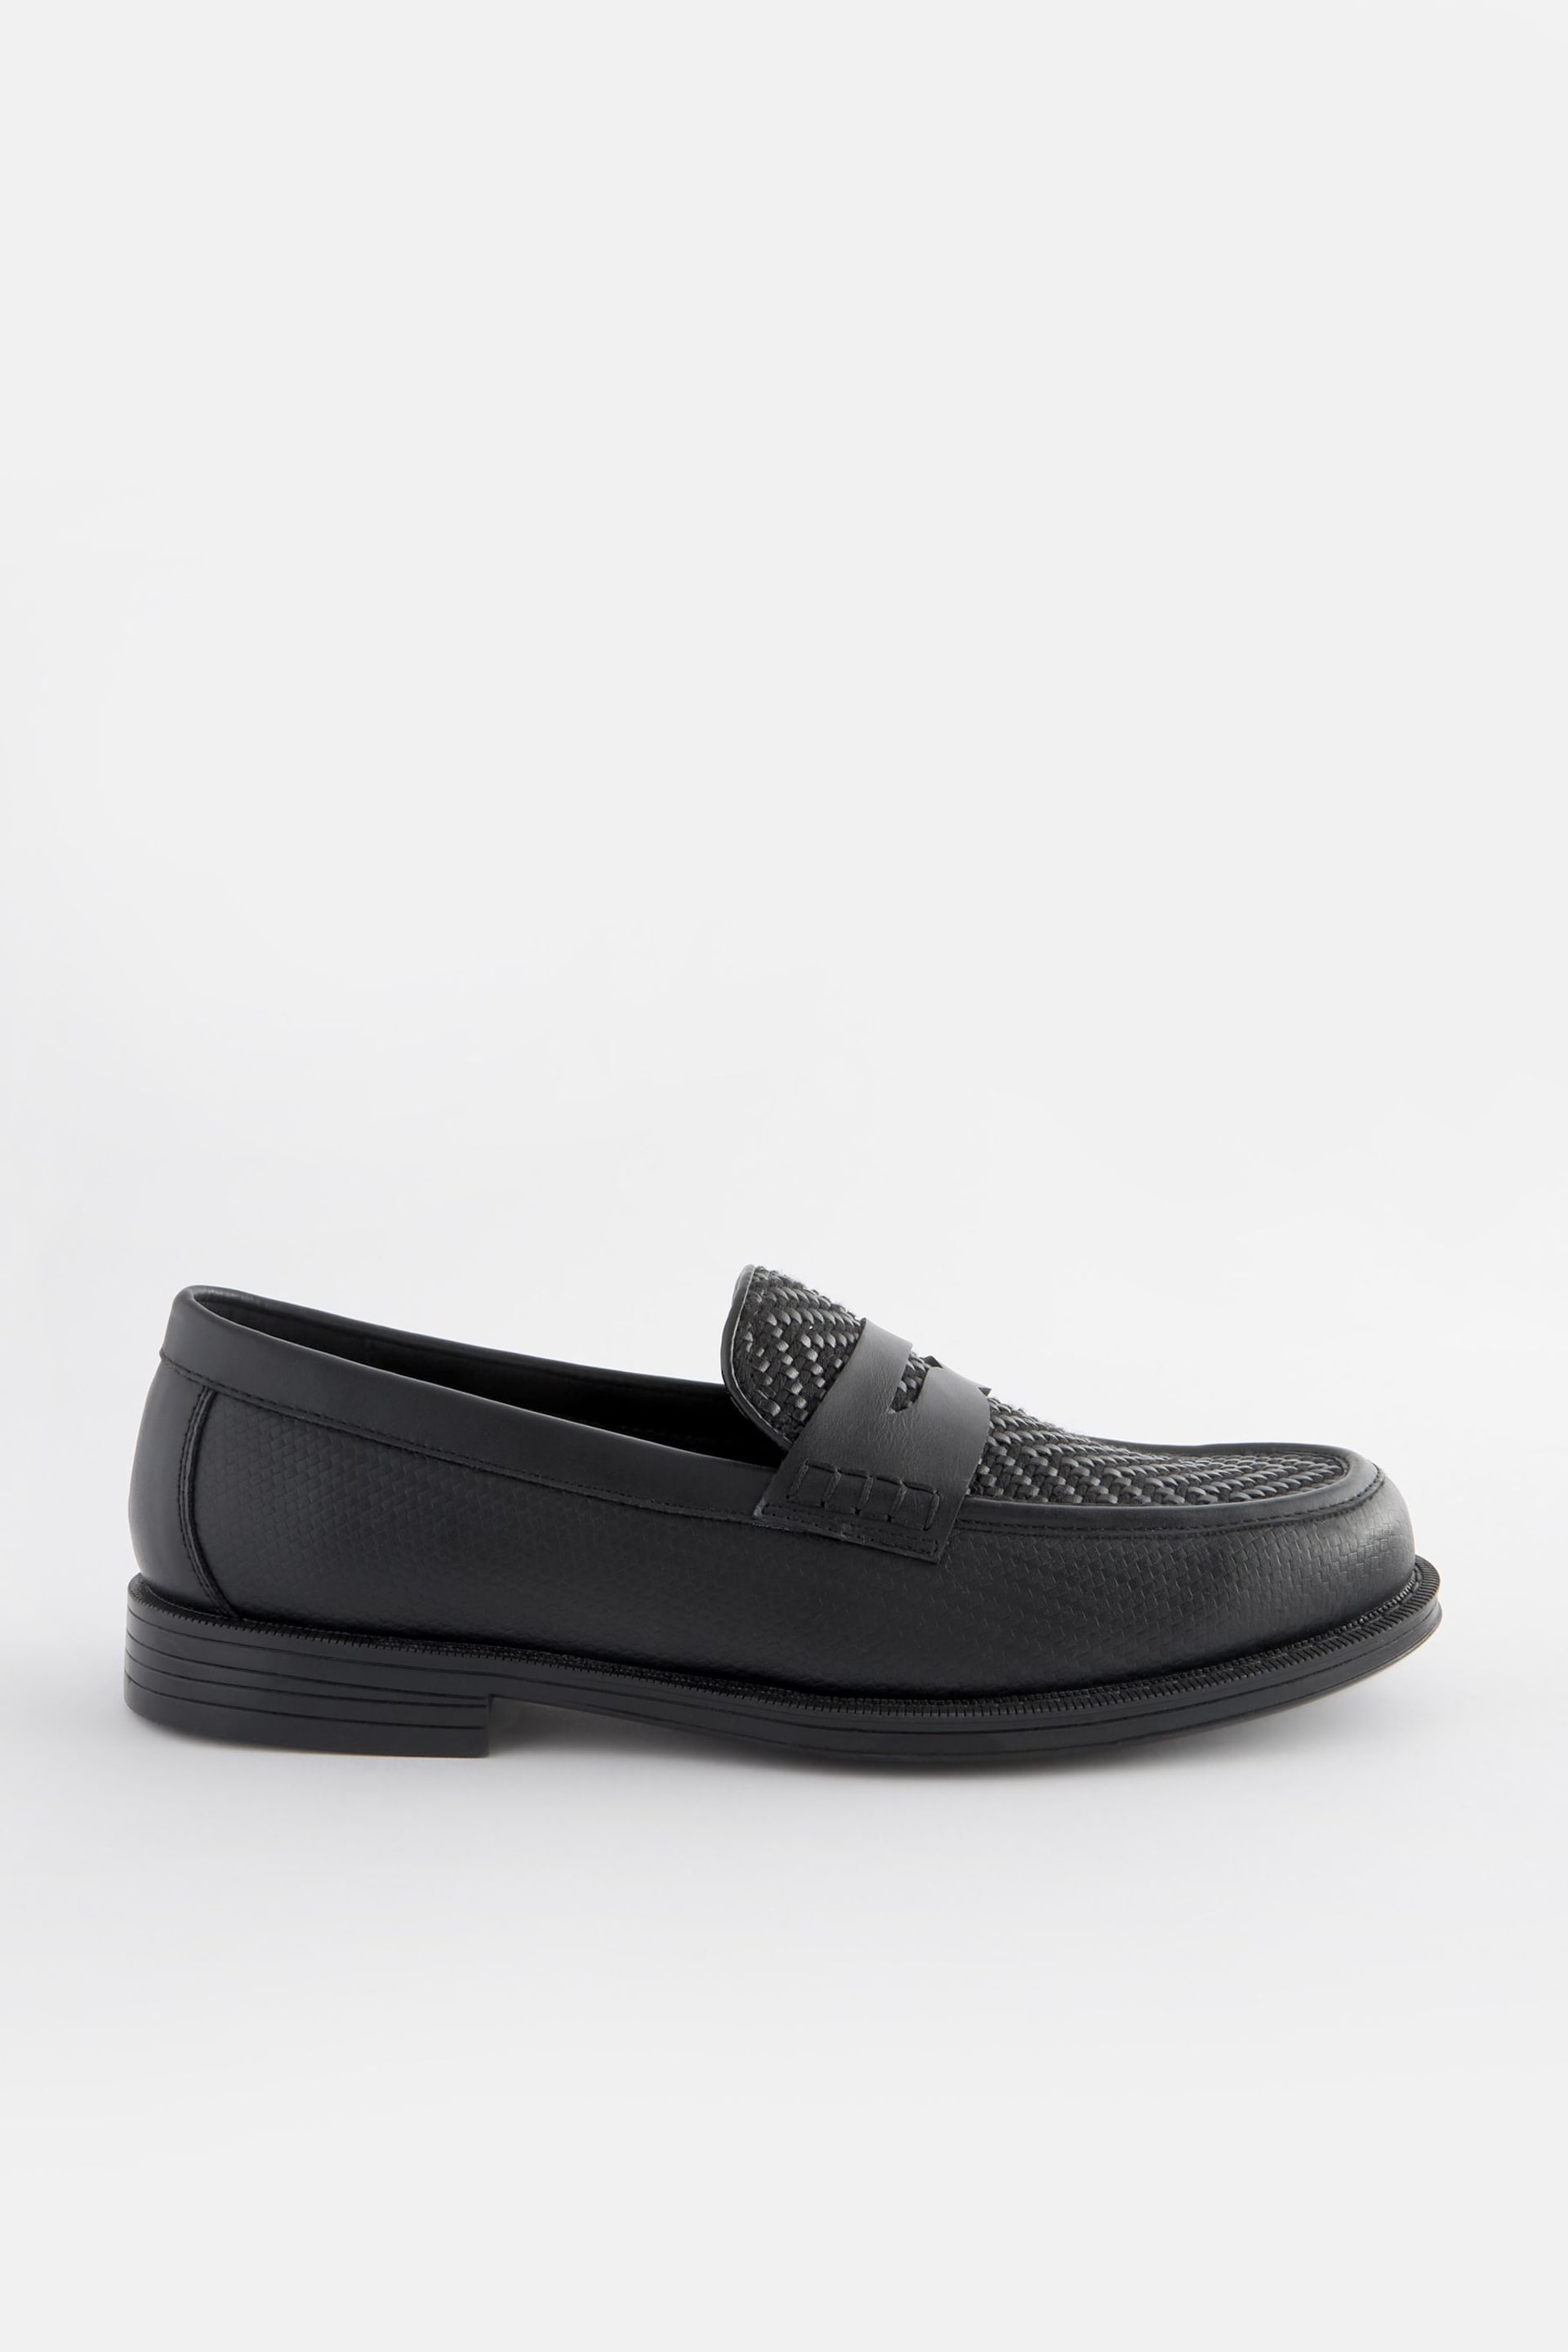 Black Weave Detail Loafers - Image 2 of 6